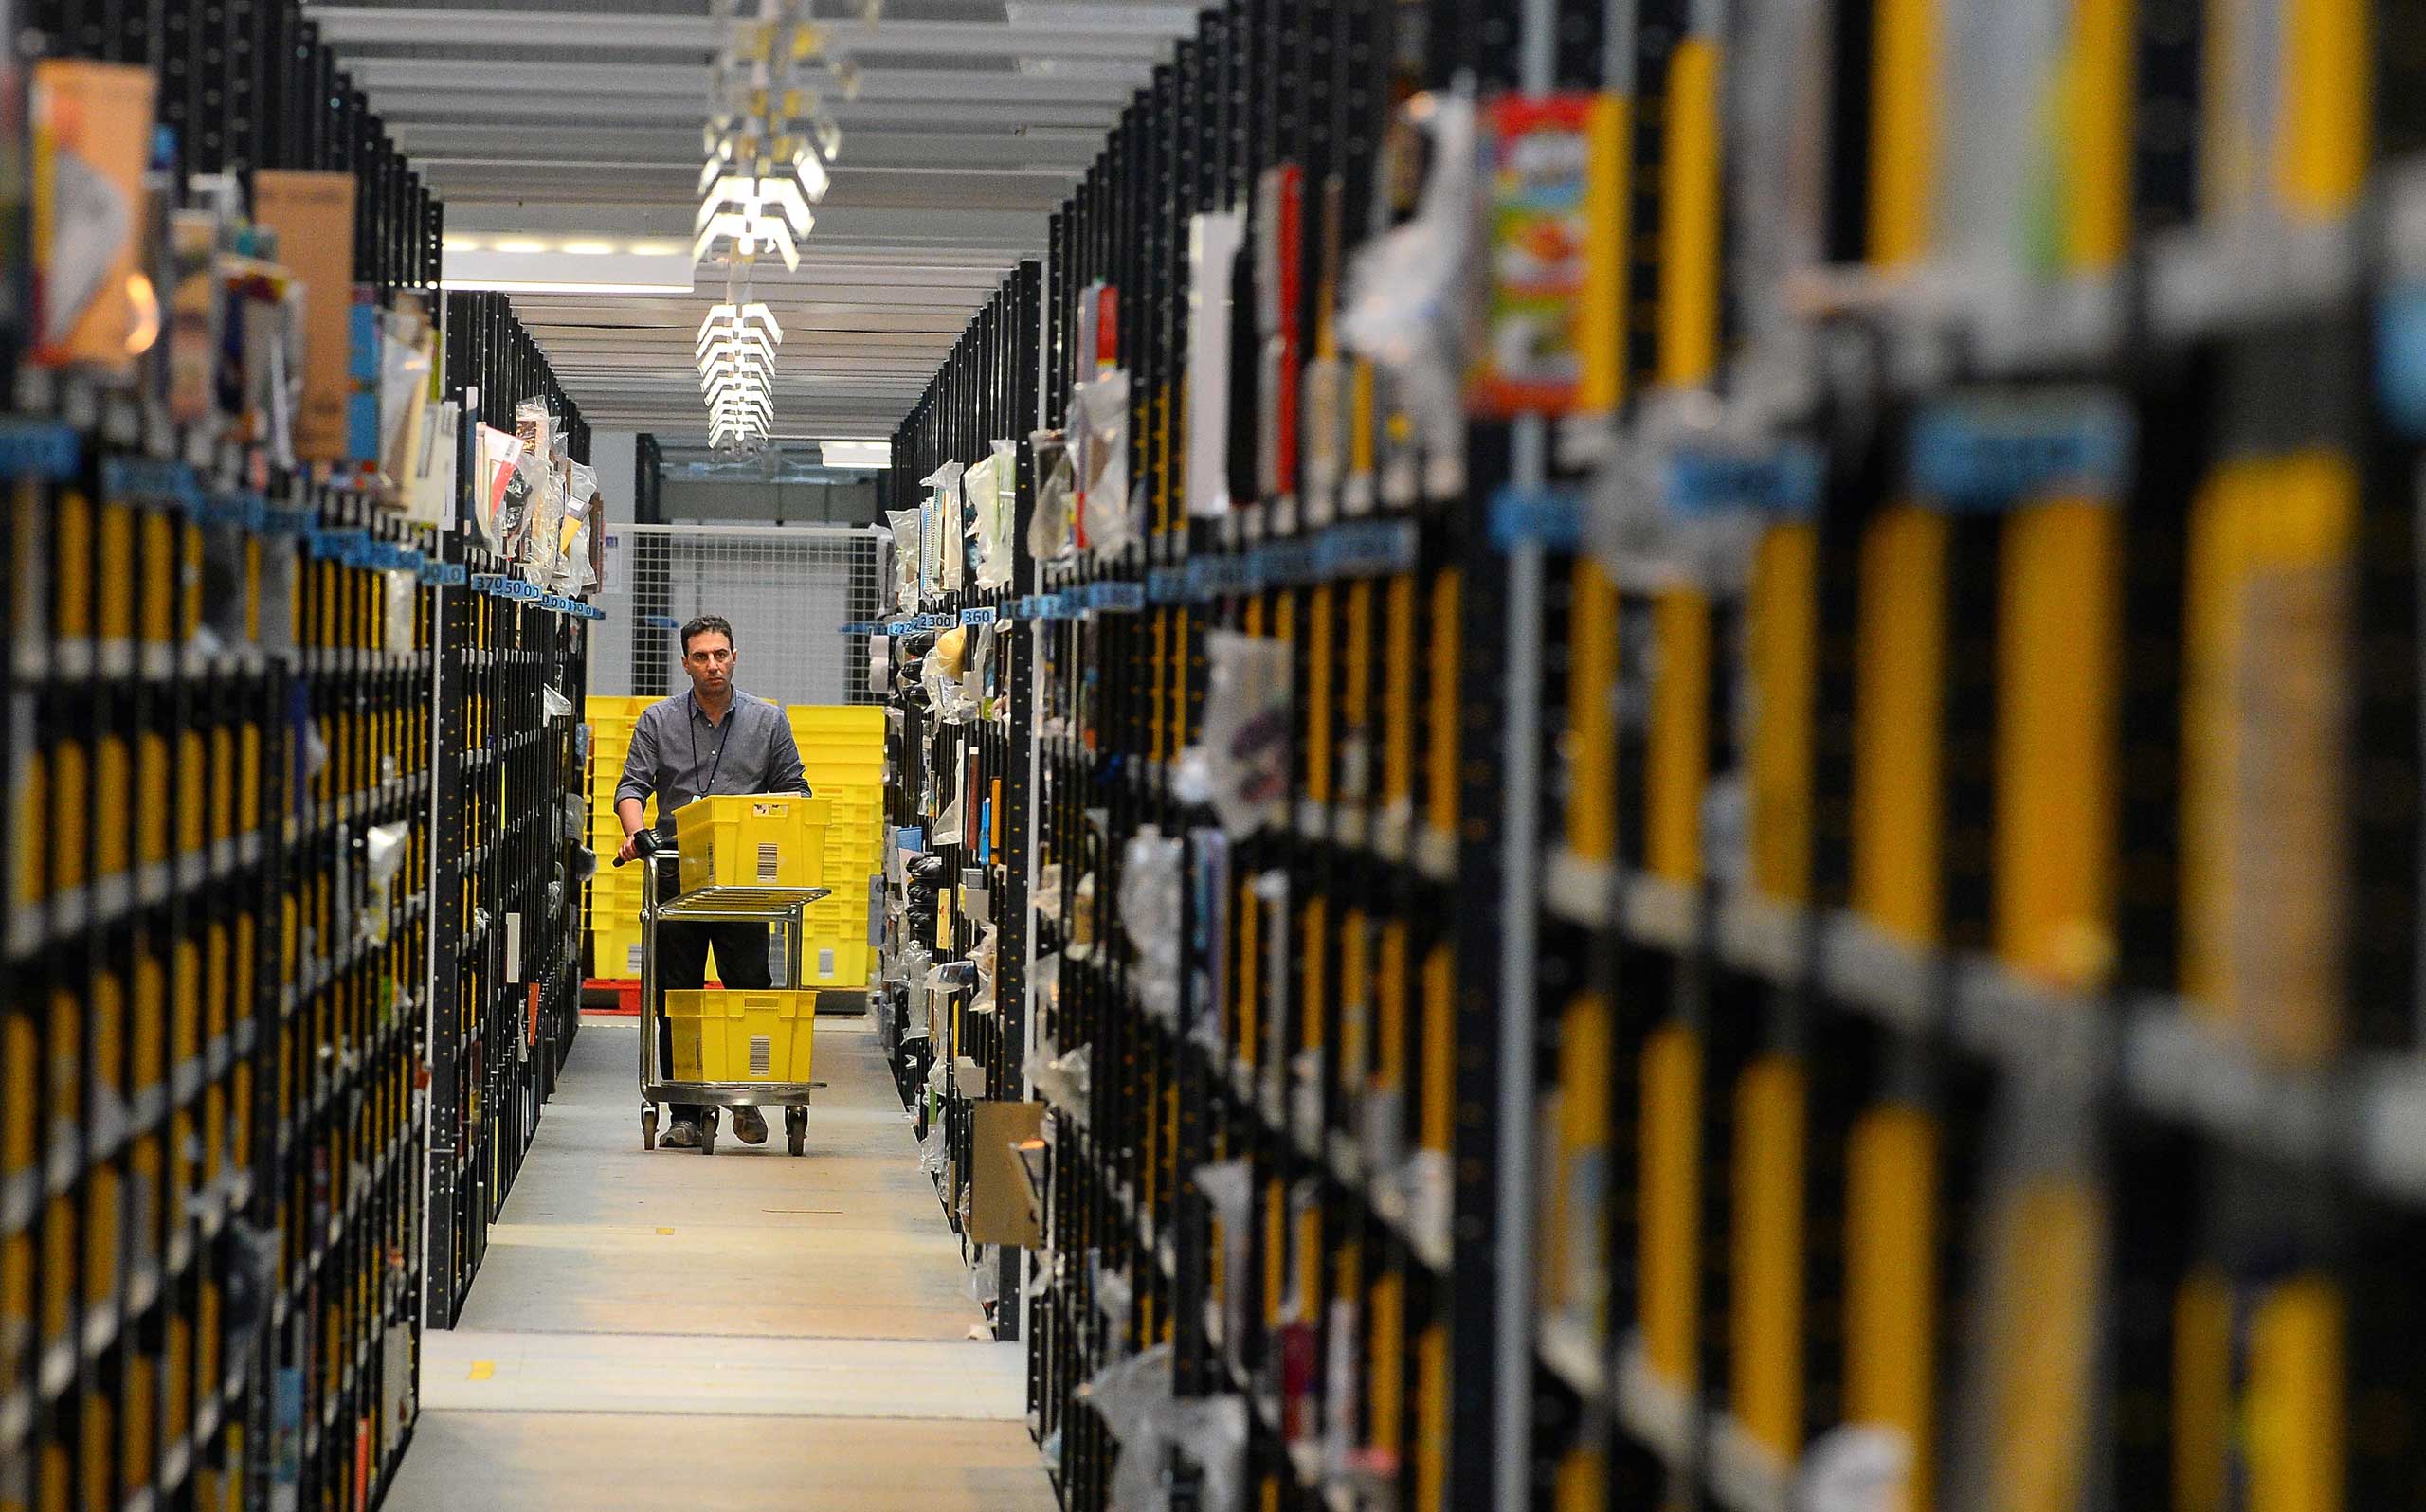 A worker collects order items at the Fulfilment Centre for online retail giant Amazon in Peterborough, central England, on Nov. 28, 2013.